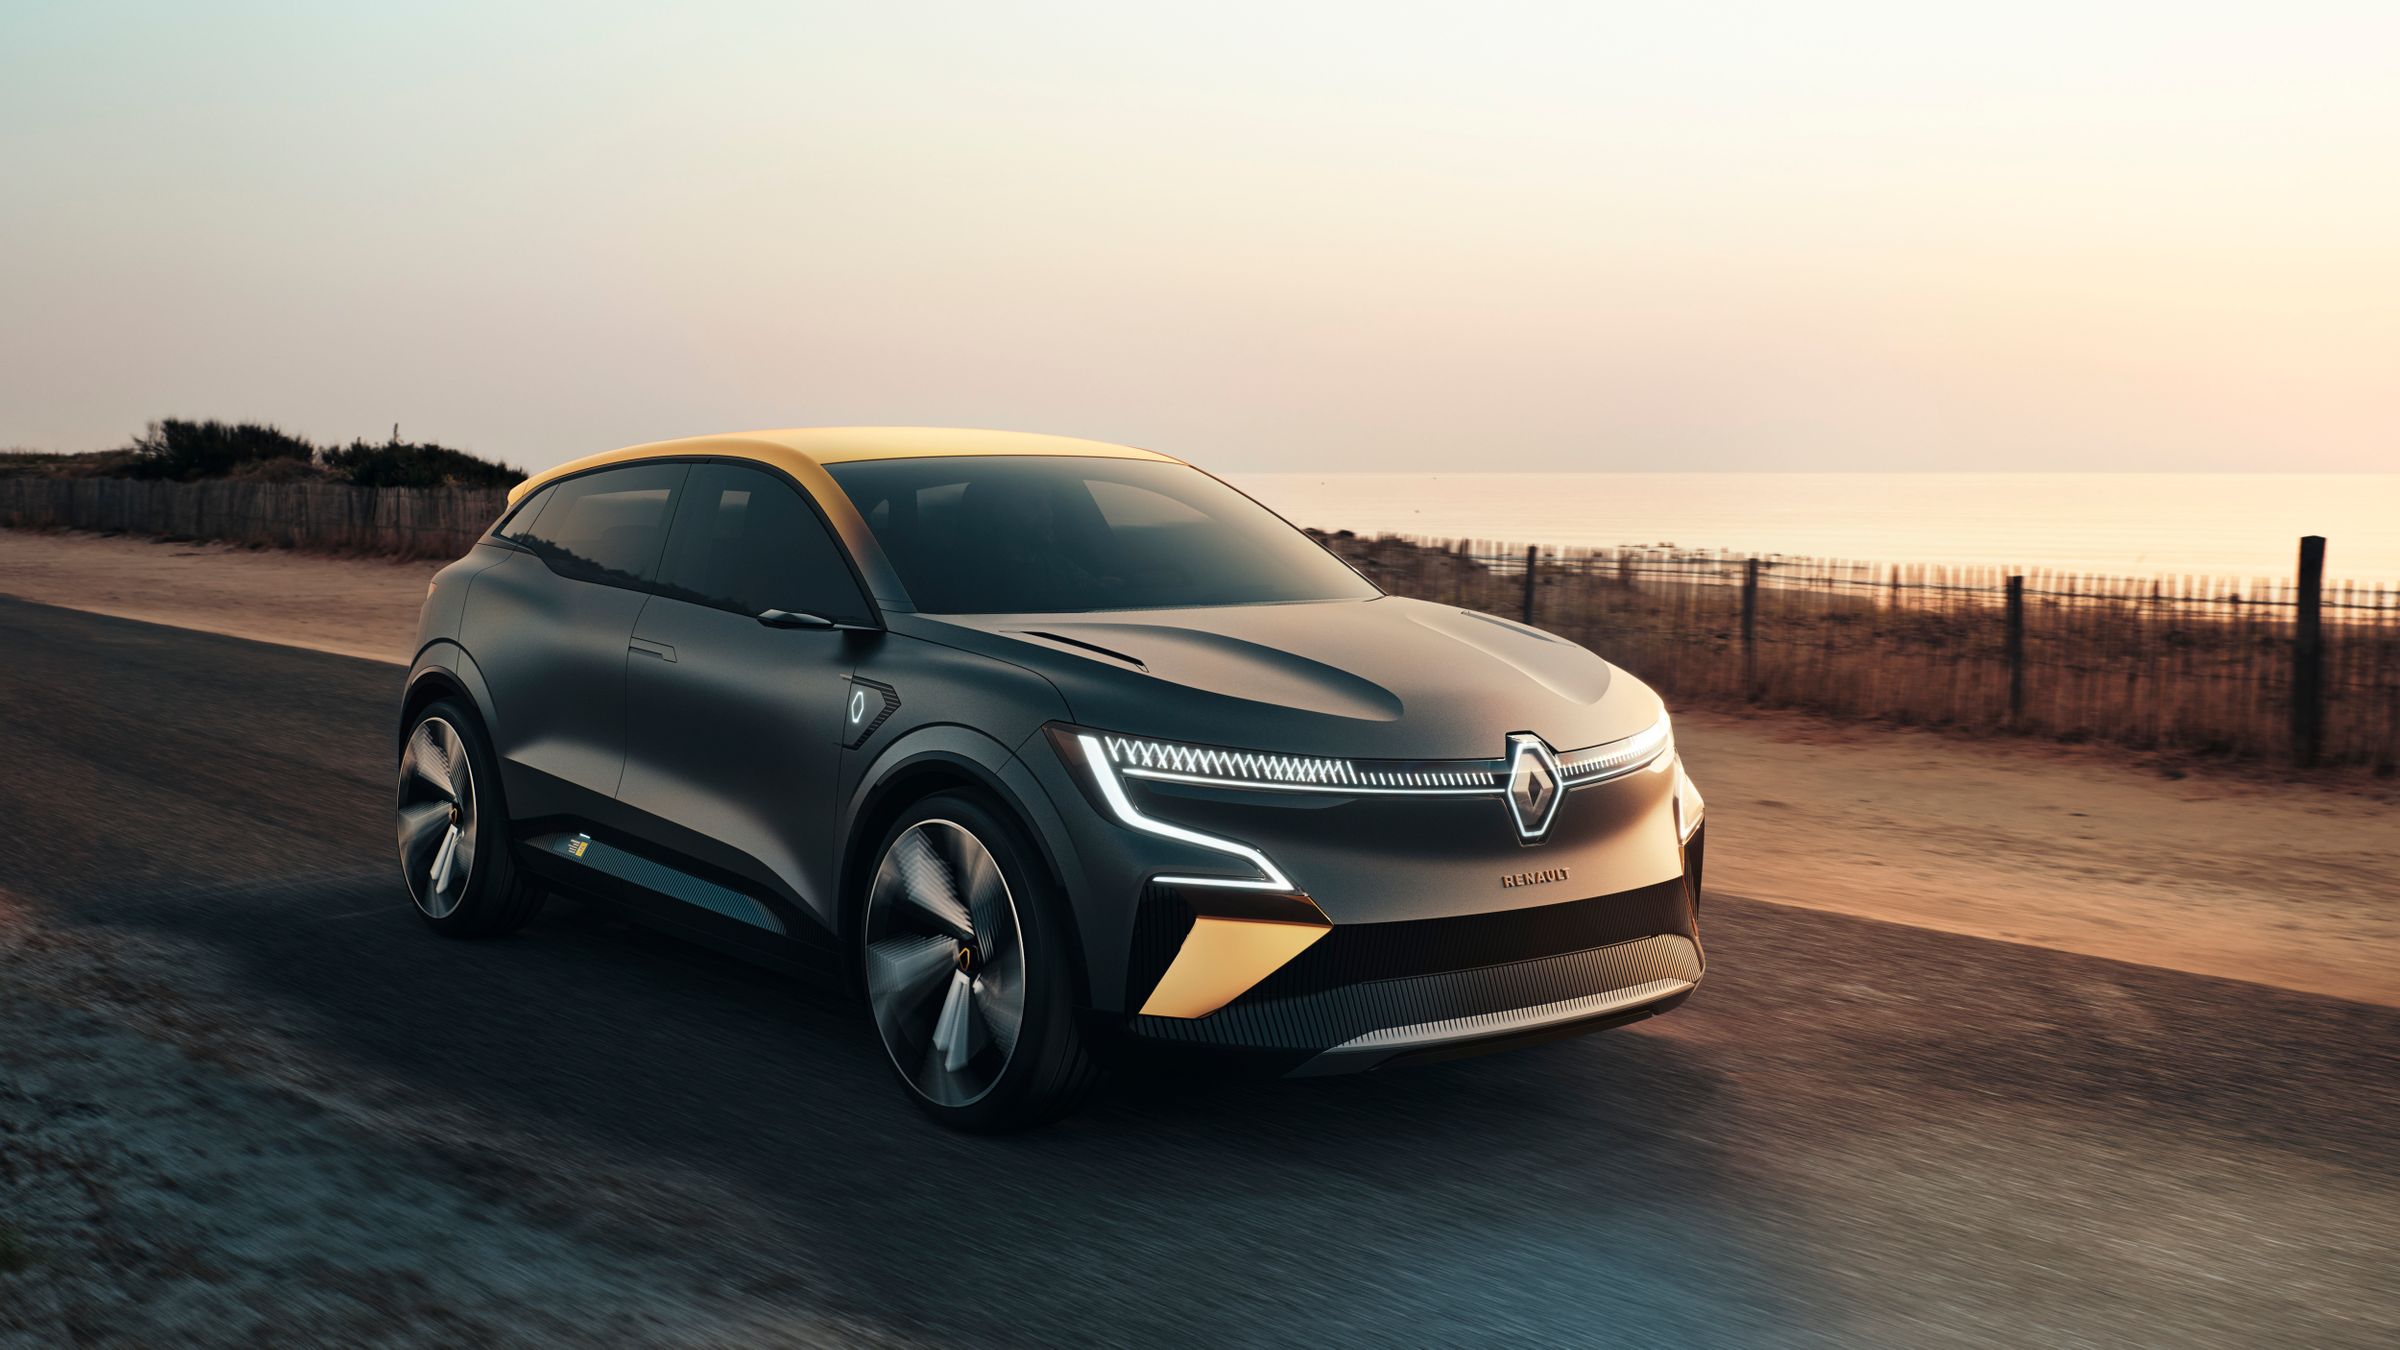 Renault unveils two new electric car